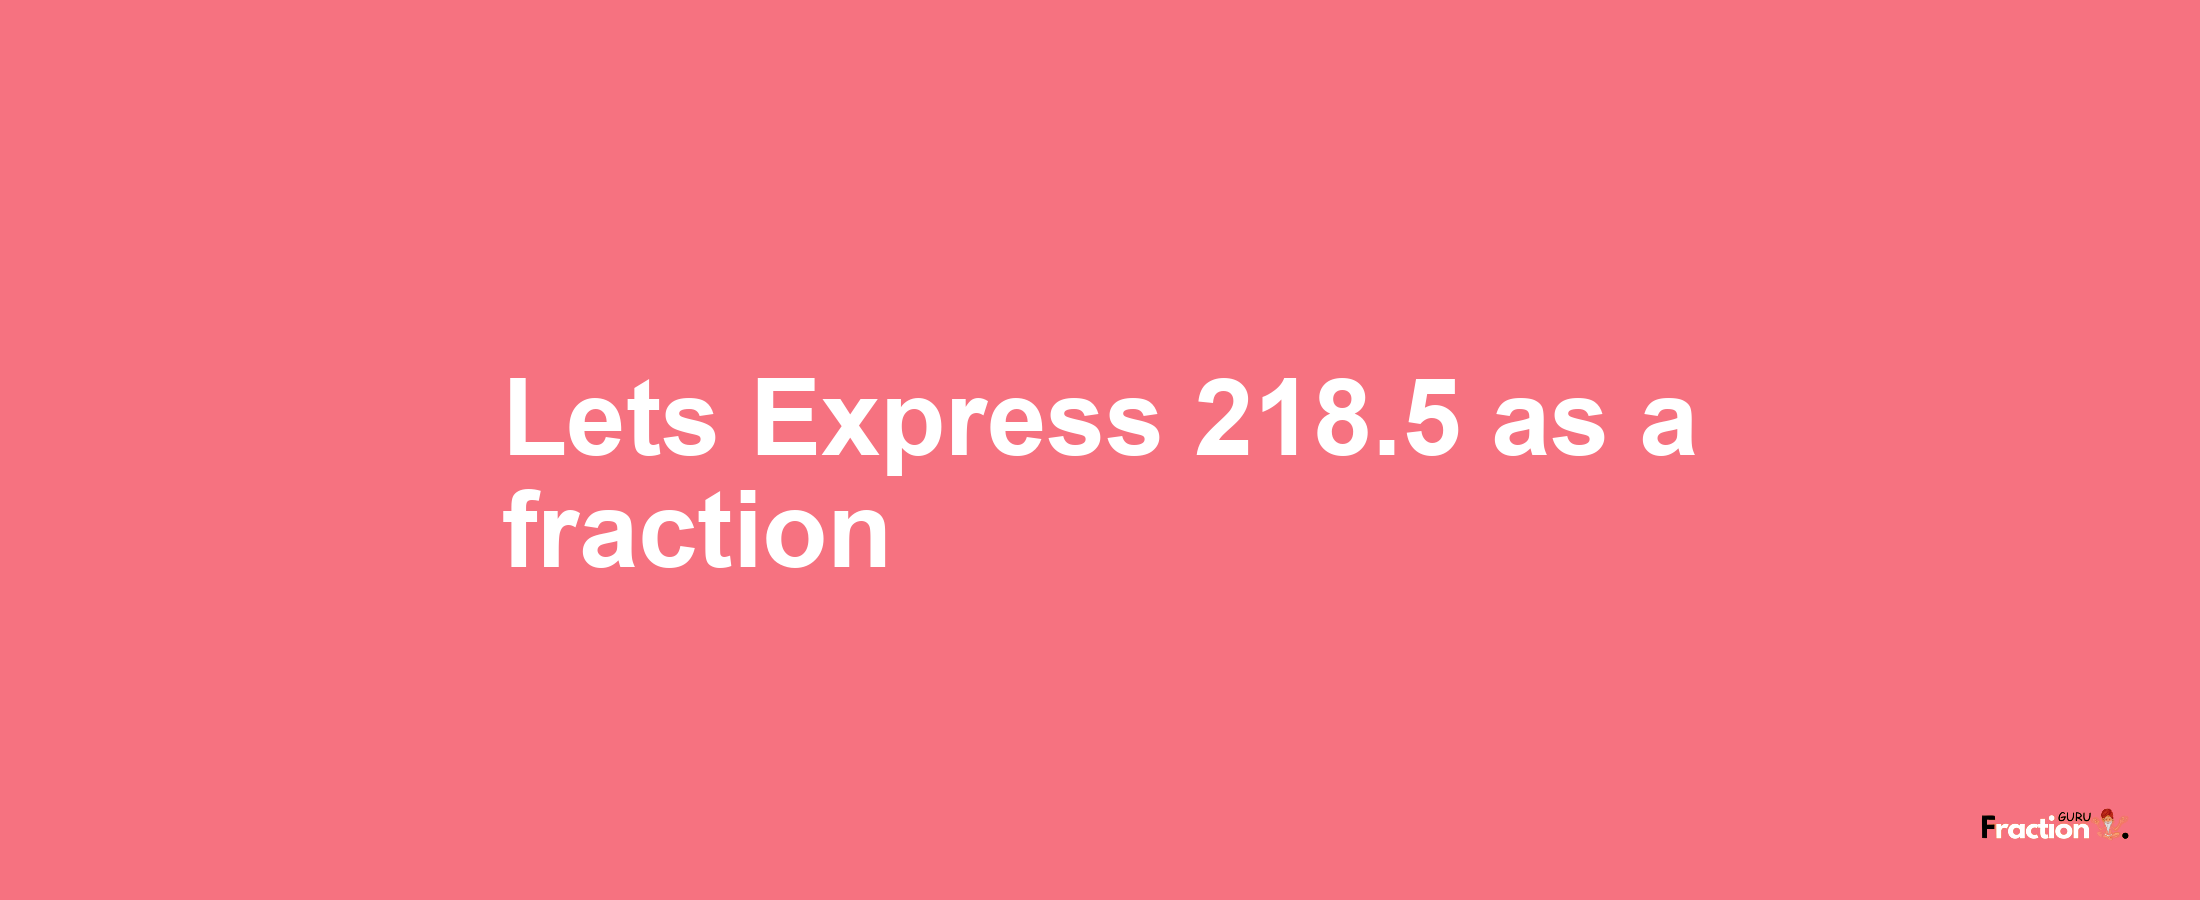 Lets Express 218.5 as afraction